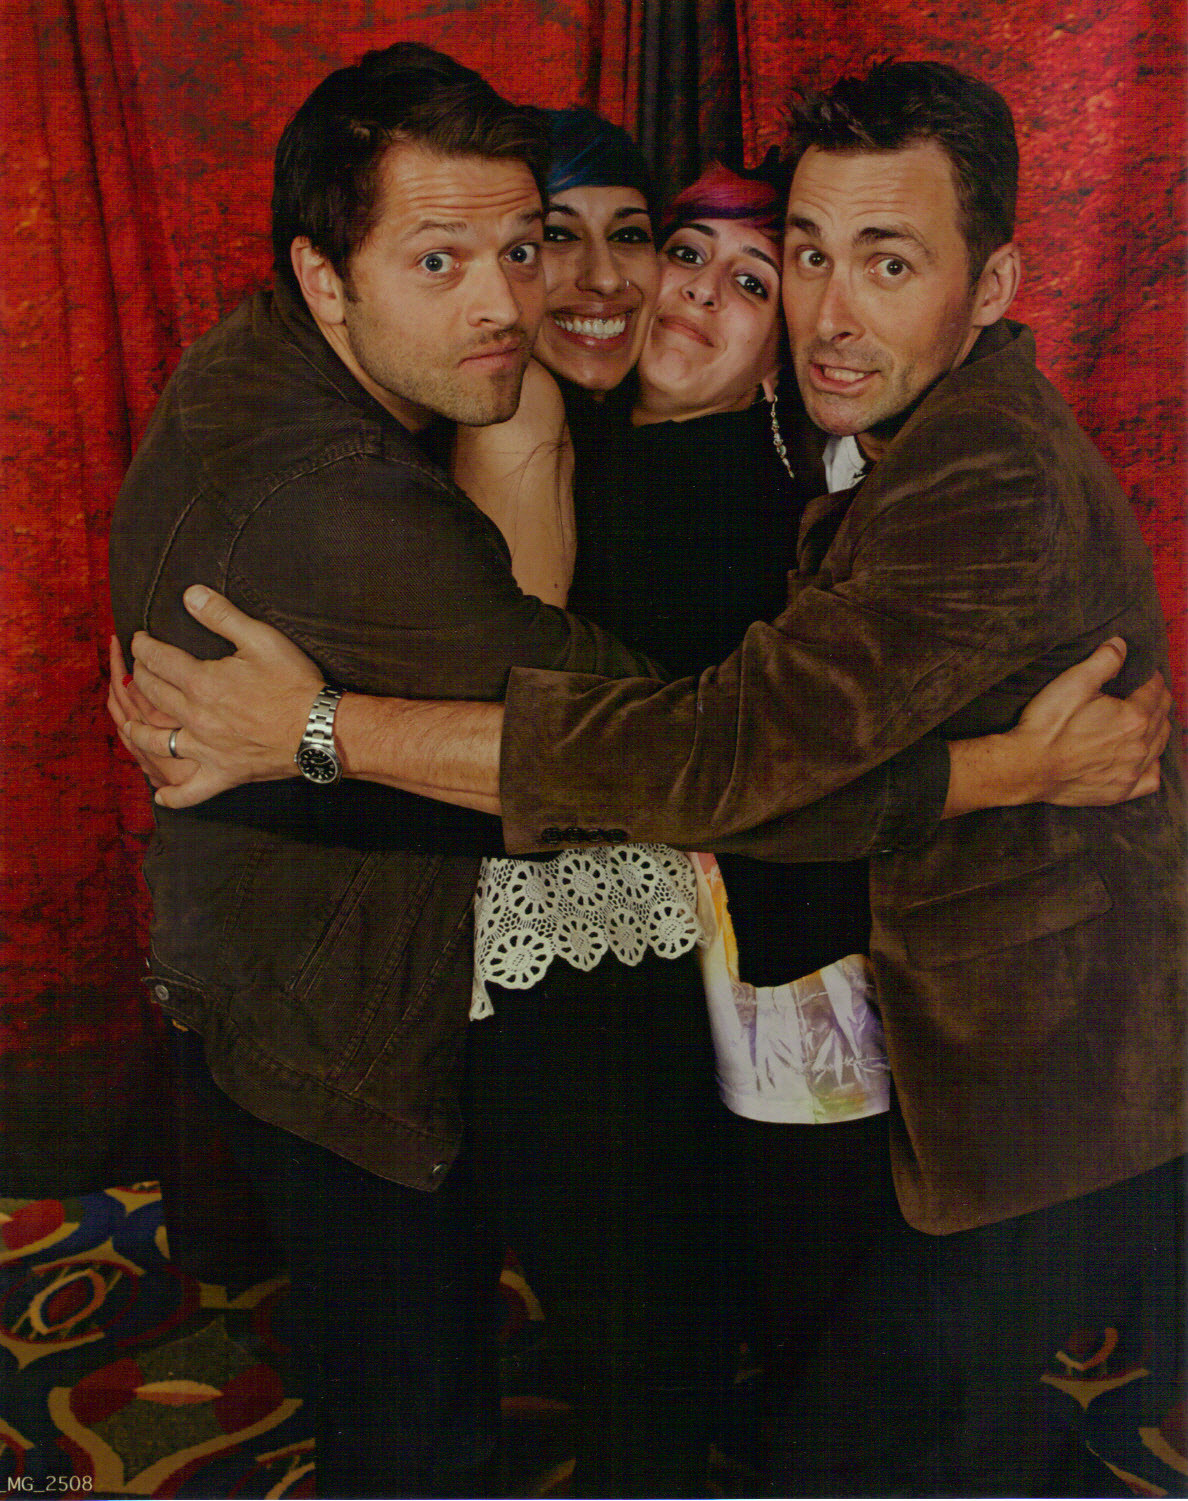 Maxx and my photo op with Misha Collins and James Patrick Stuart.  It was pretty